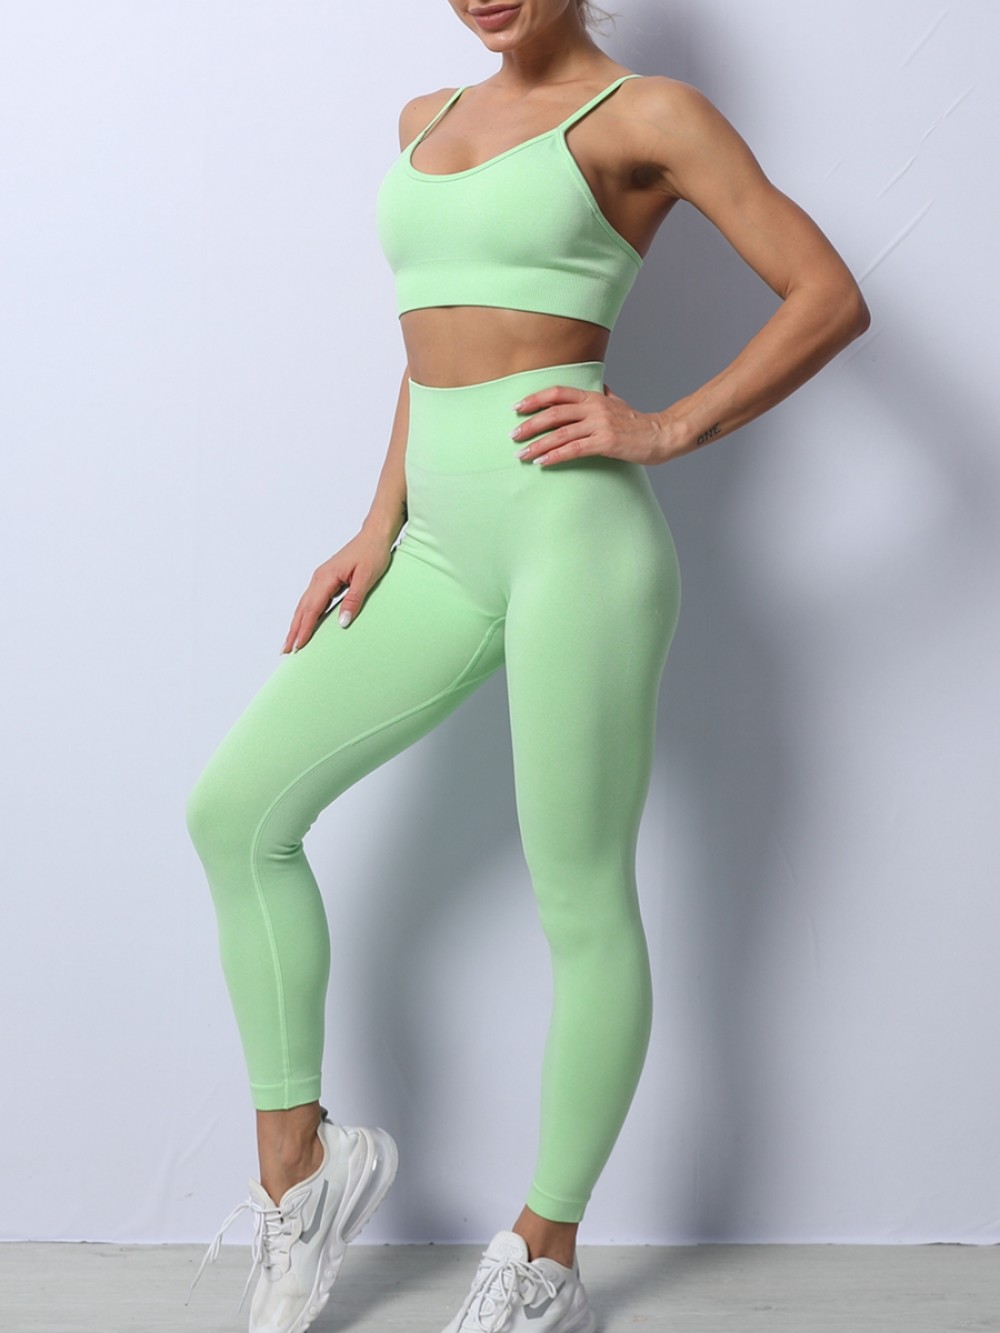 Green Backless Spaghetti Straps Yoga Wear Suit Fast Shipping